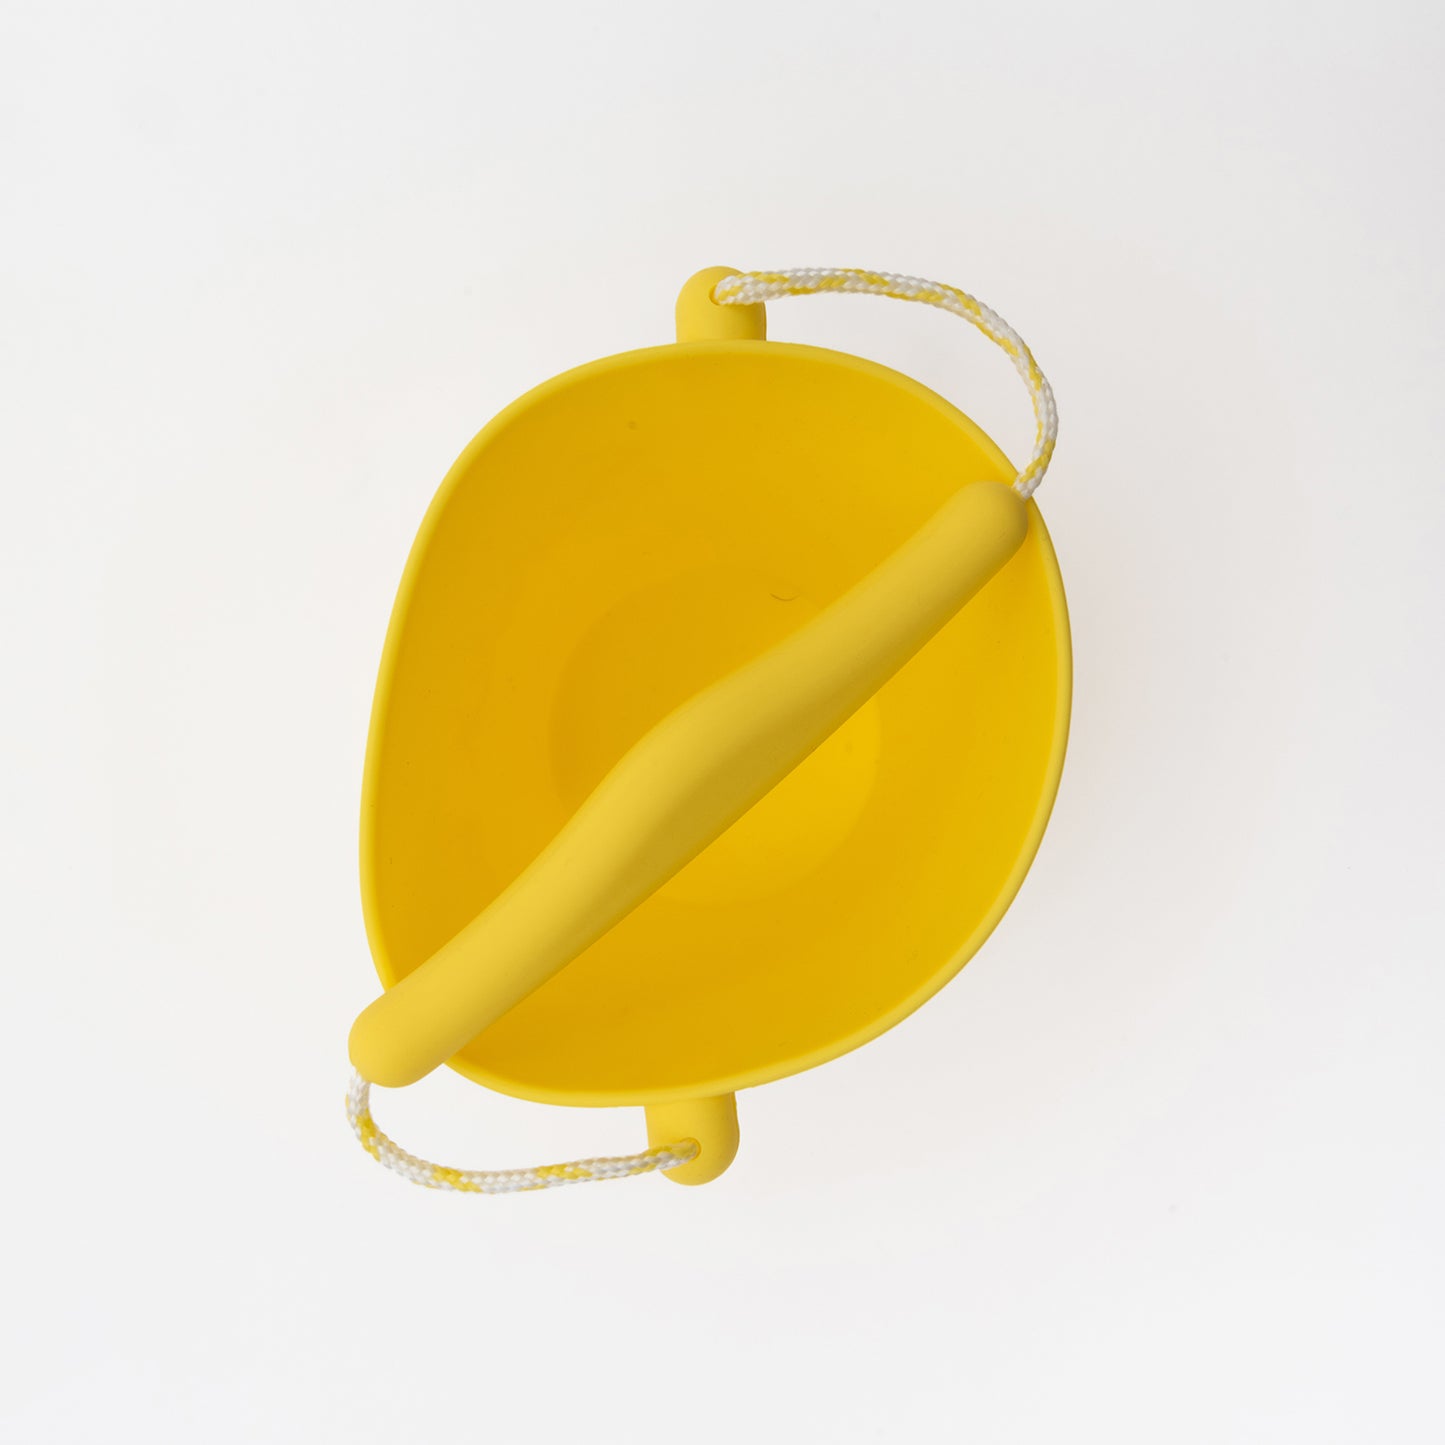  yellow silicone bucket from above